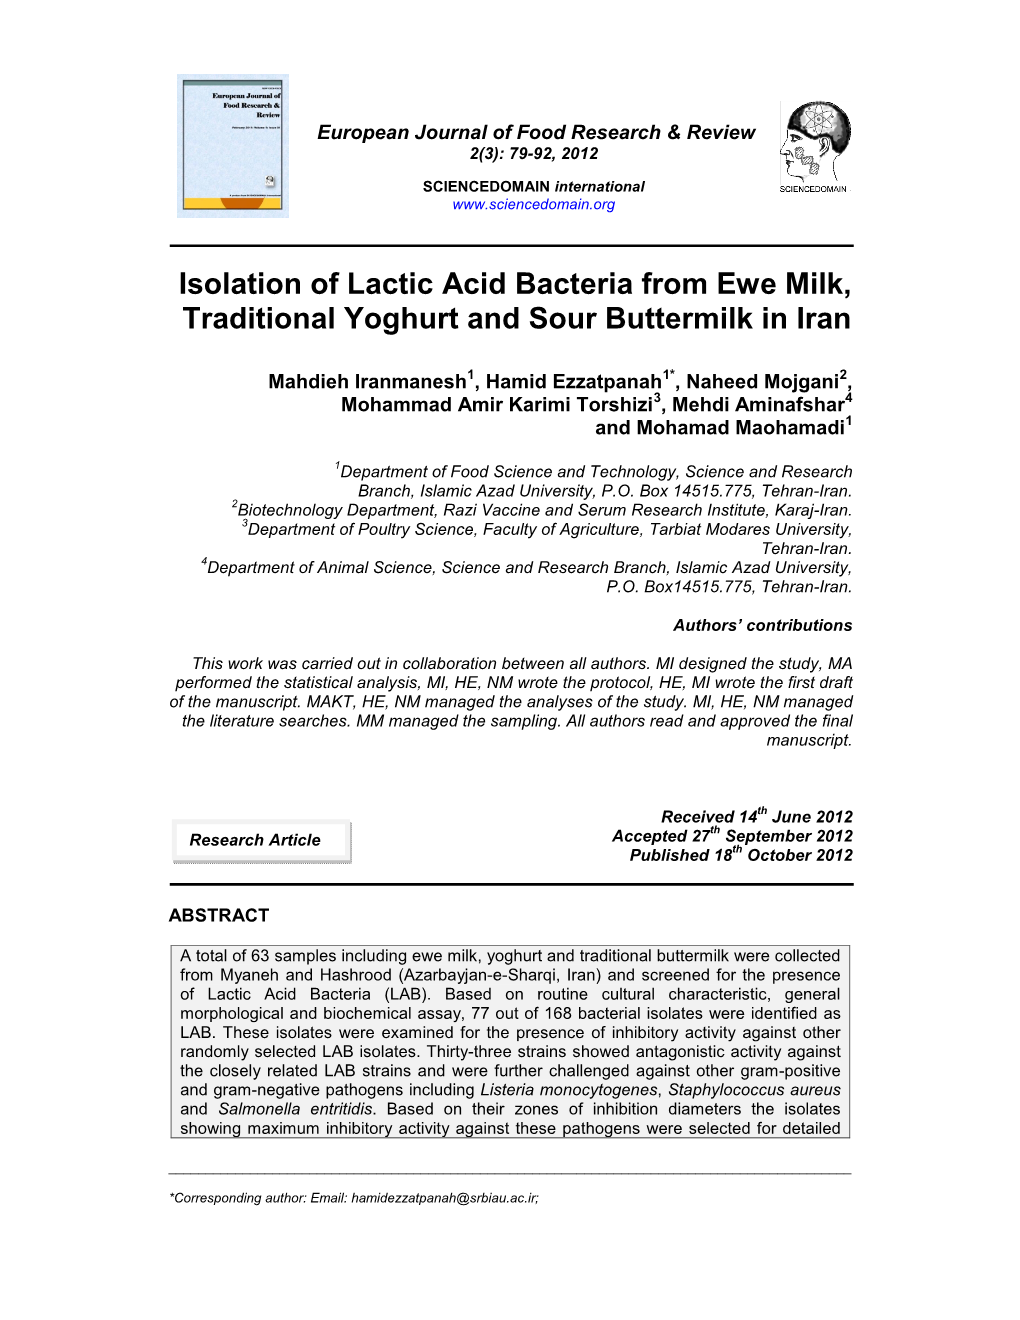 Isolation of Lactic Acid Bacteria from Ewe Milk, Traditional Yoghurt and Sour Buttermilk in Iran